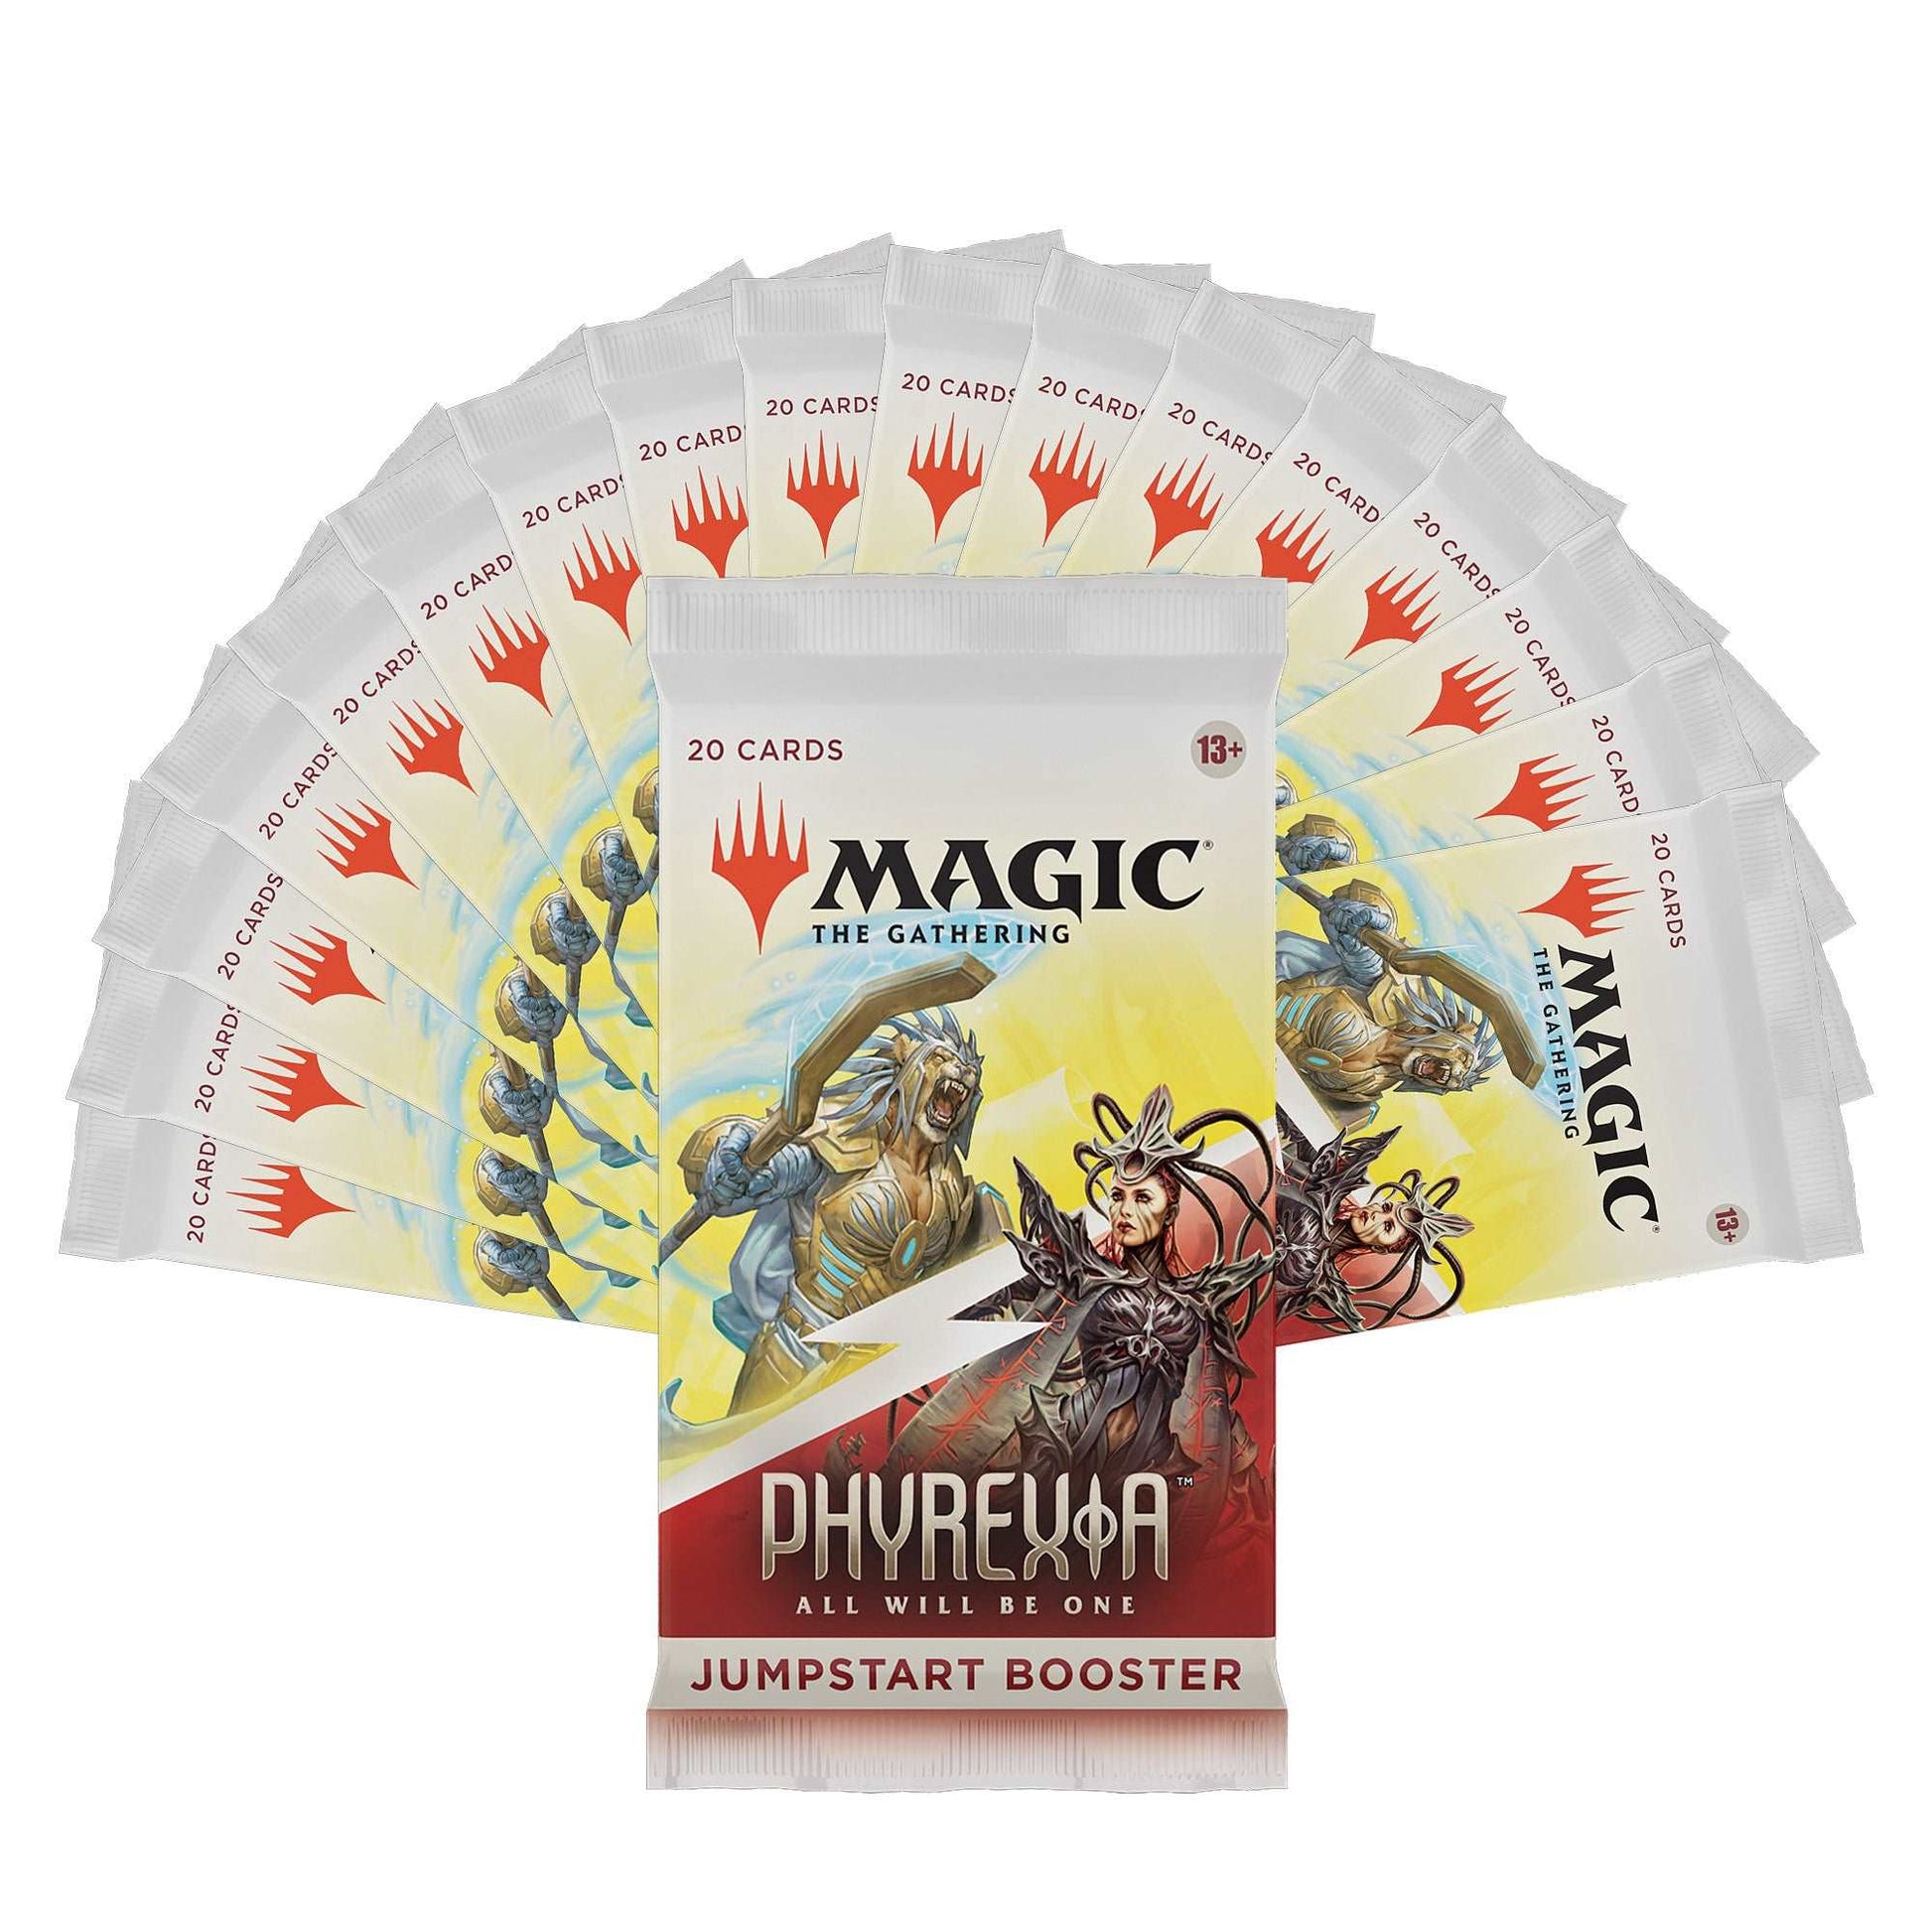 Magic The Gathering: Phyrexia - All Will Be One Jumpstart Booster Box, Wizards of the Coast, Magic the Gathering Sealed, magic-the-gathering-phyrexia-all-will-be-one-jumpstart-booster-box, Booster Box, MTG Sealed, New Arrival, Phyrexia: All Will Be One, Dark Ninja Gaming LA